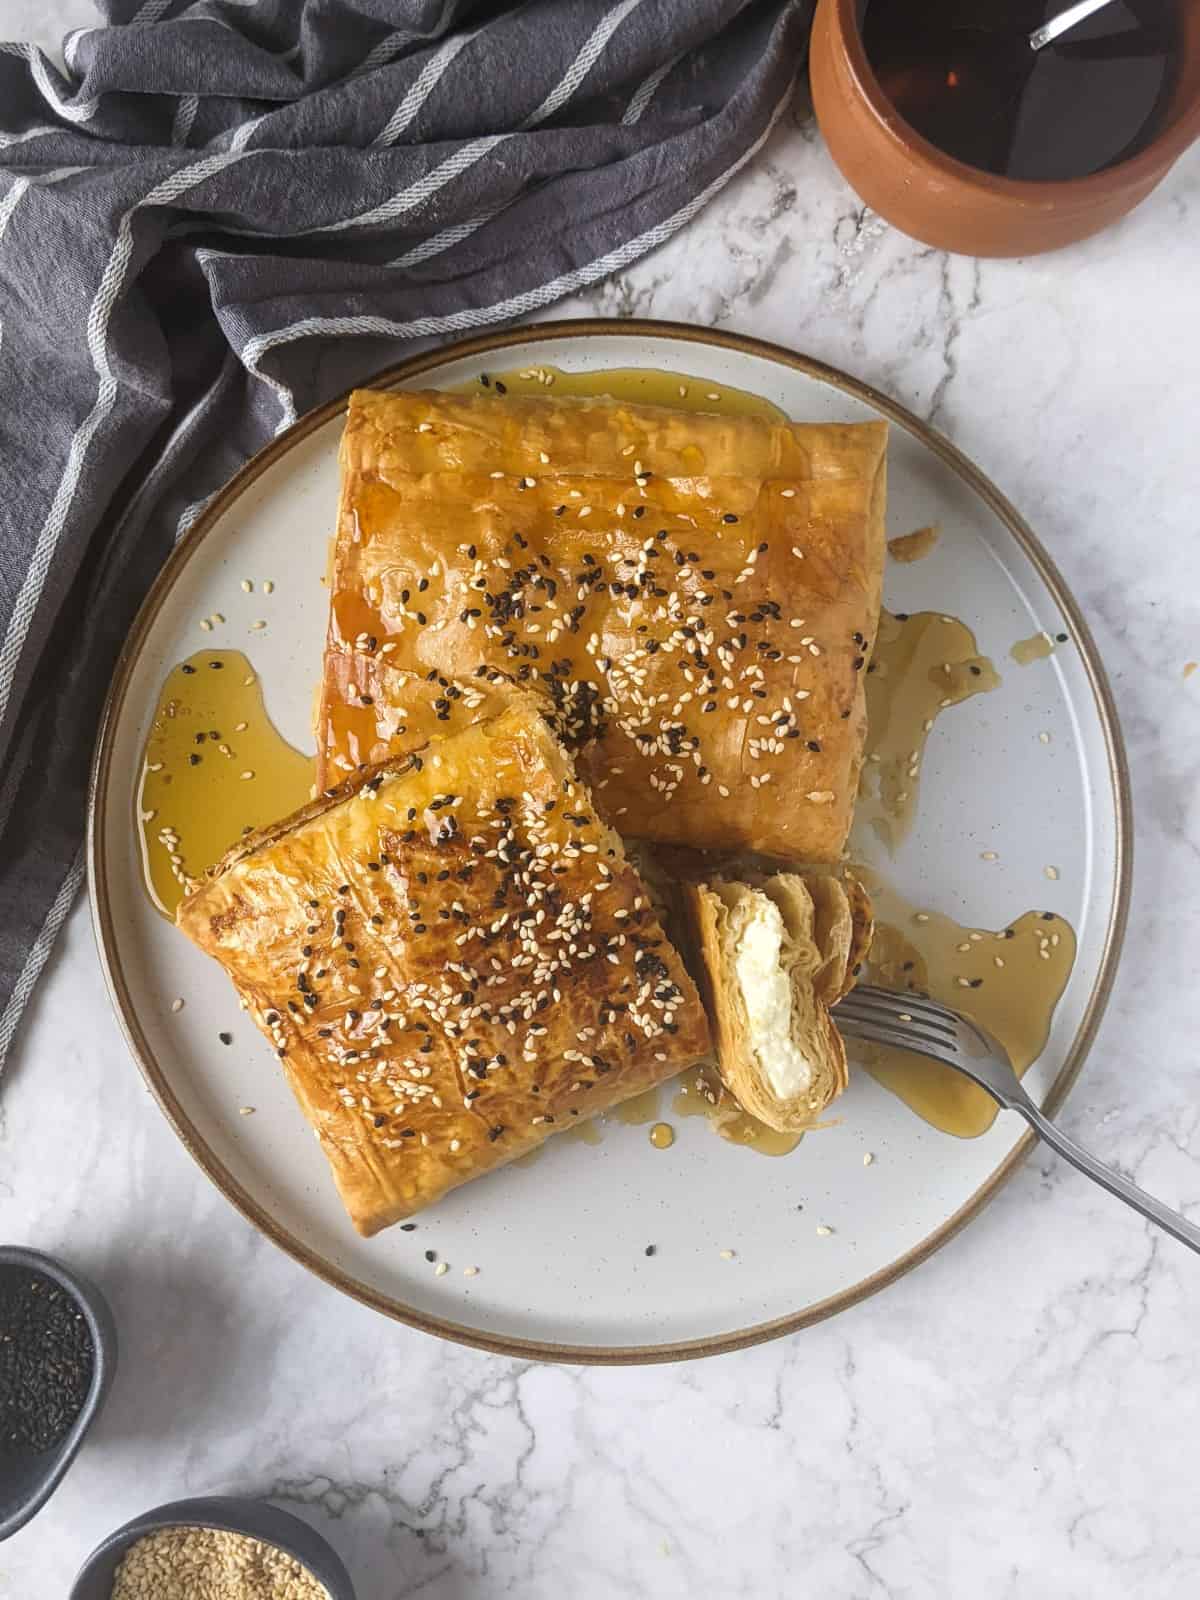 Baked Feta In Phyllo With Honey.